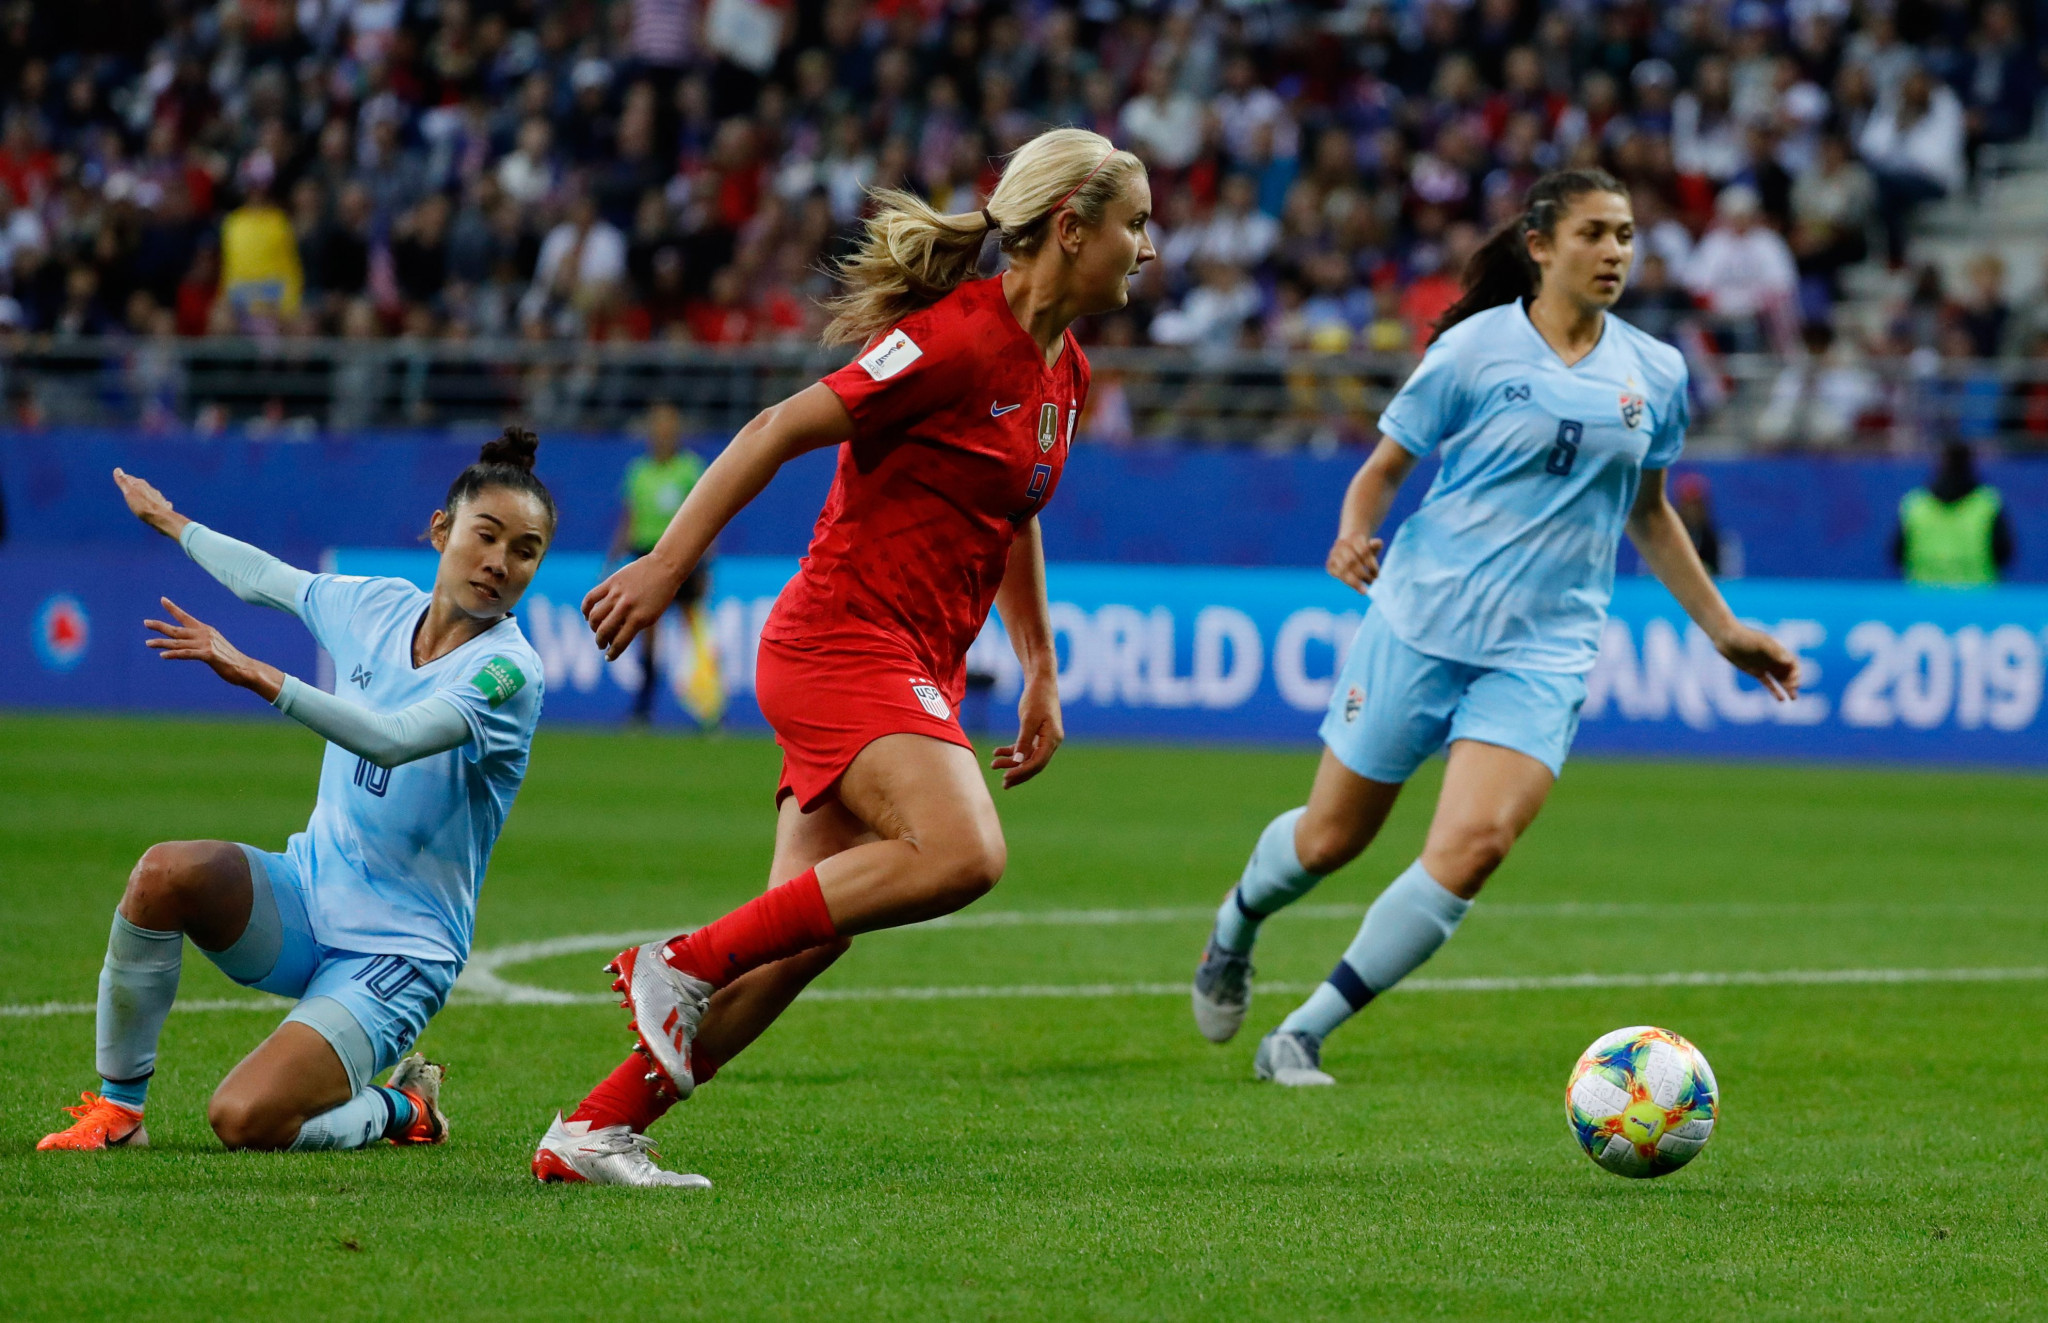 Women's football is not ready for an expanded World Cup FIFA need to wait